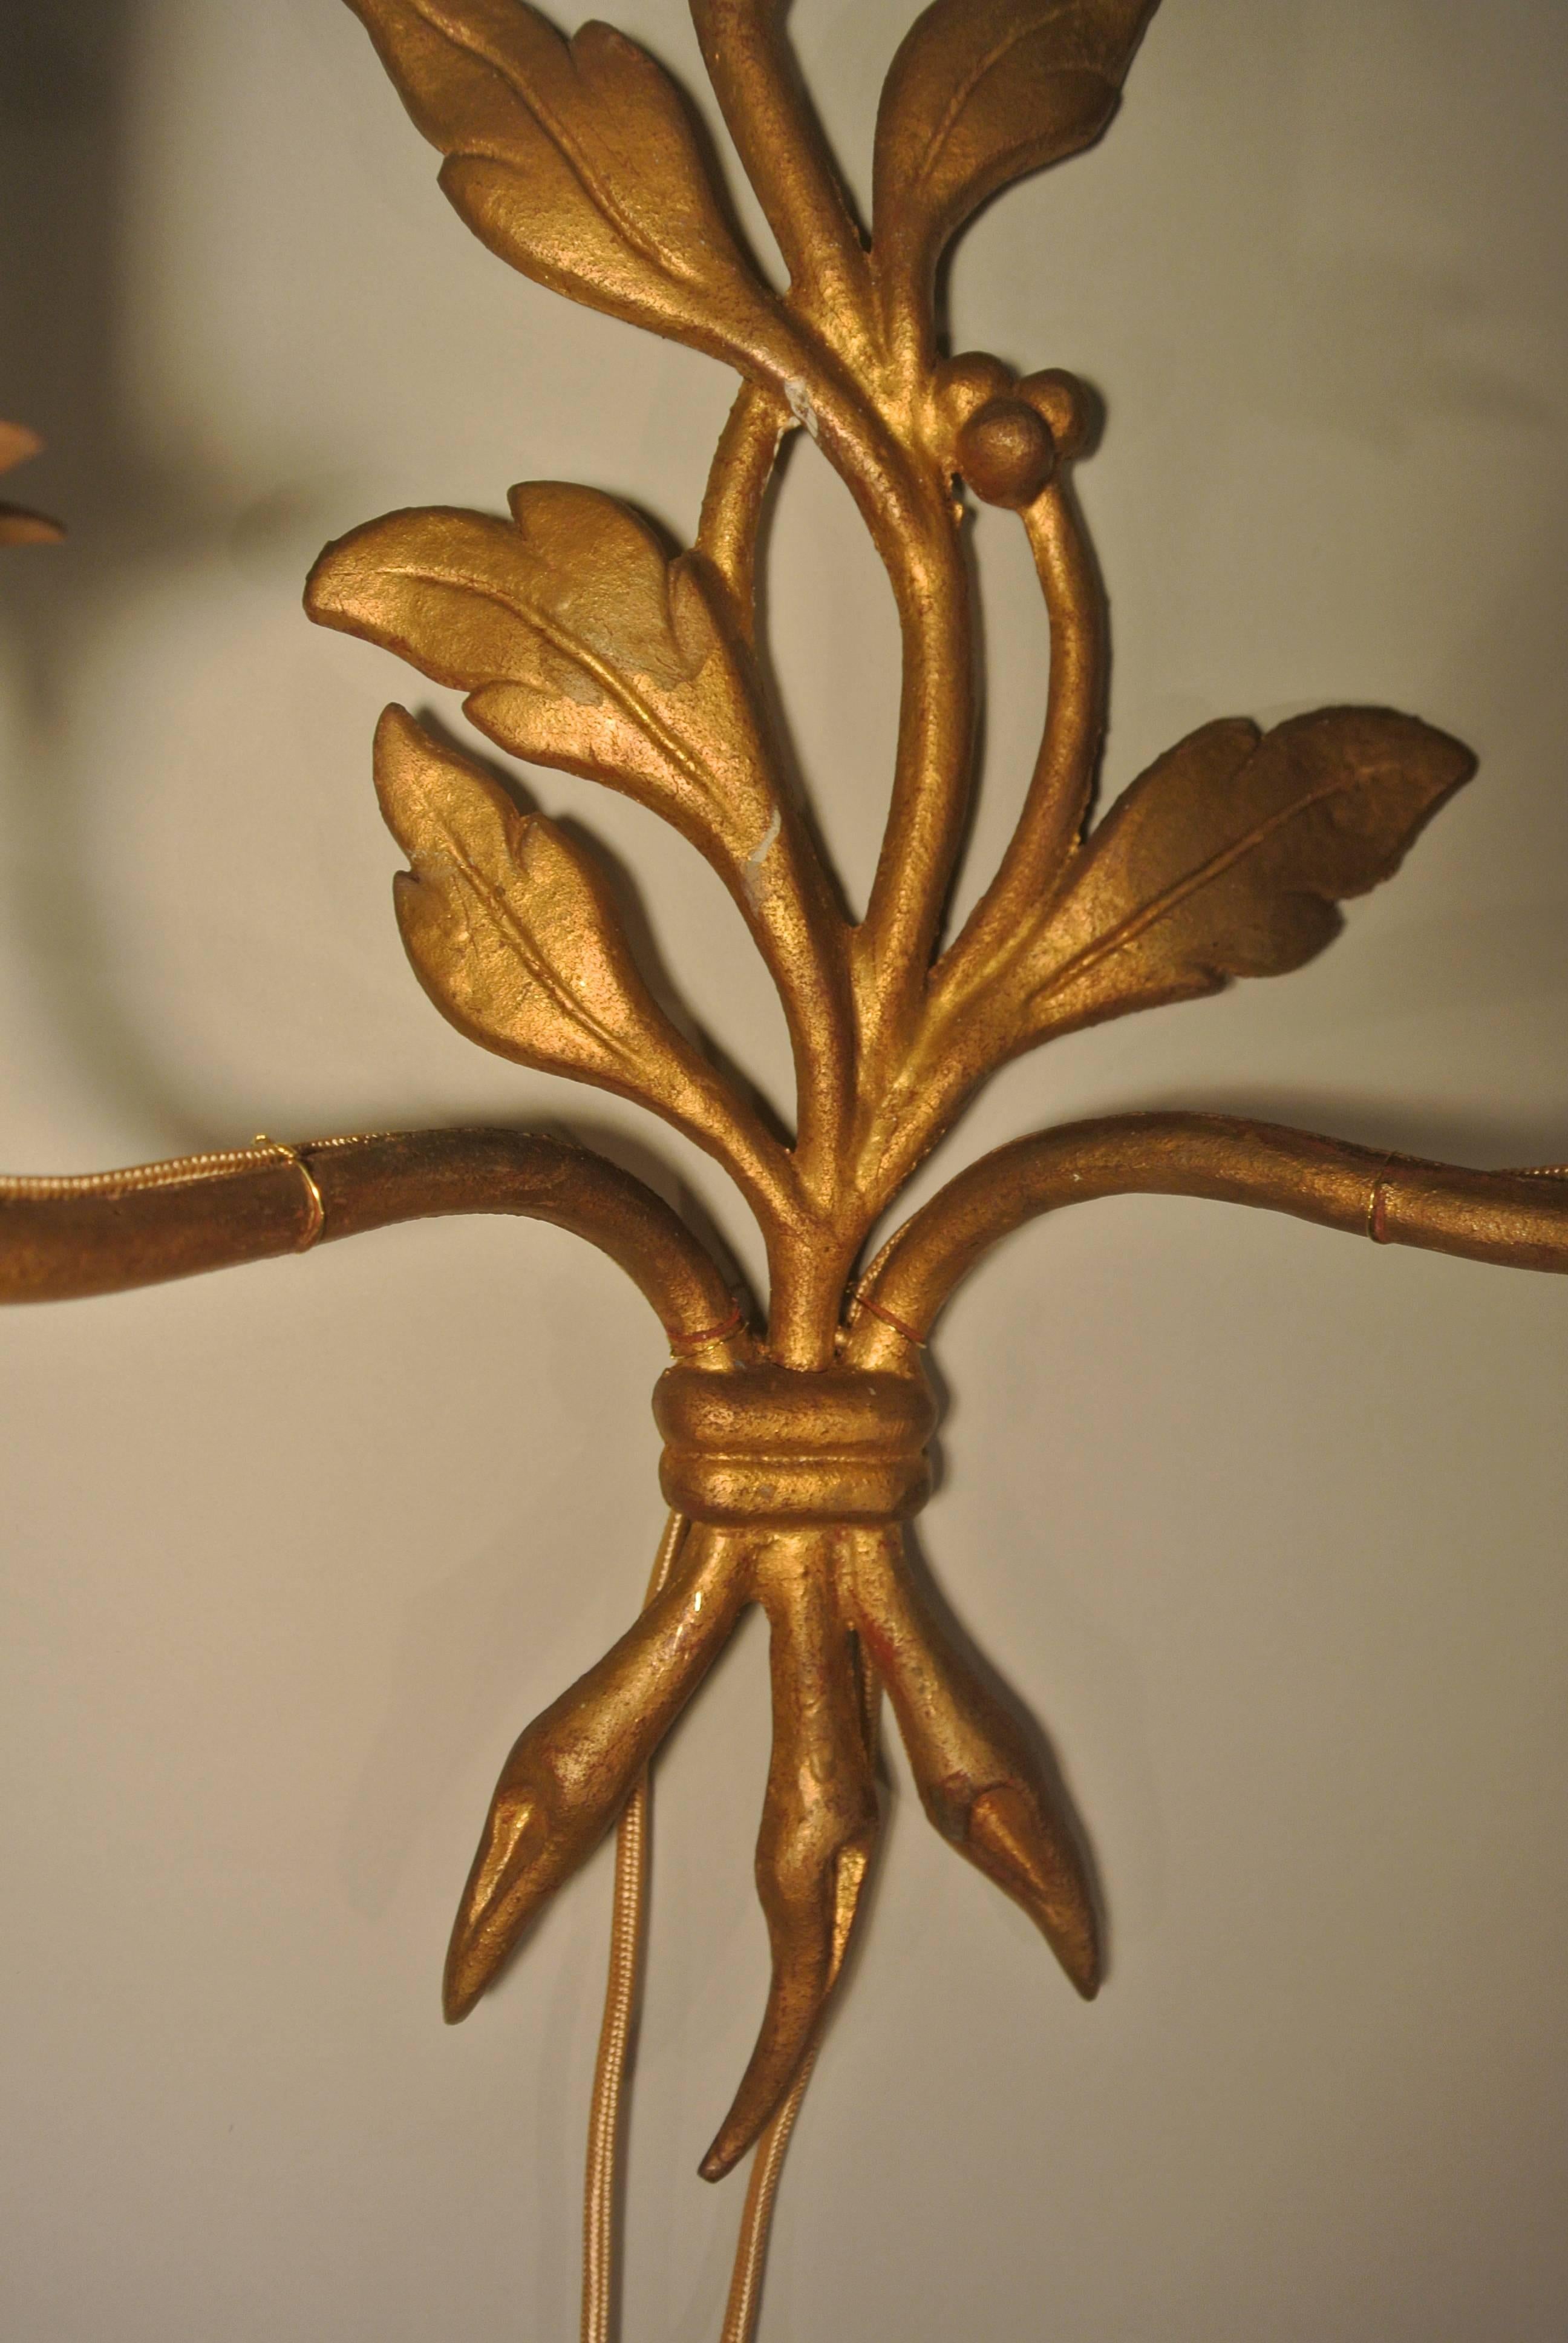 Pair of Mid-Century Modern Gold Gilt Bronze Sconces in a Leaf Design, circa 1960 For Sale 1